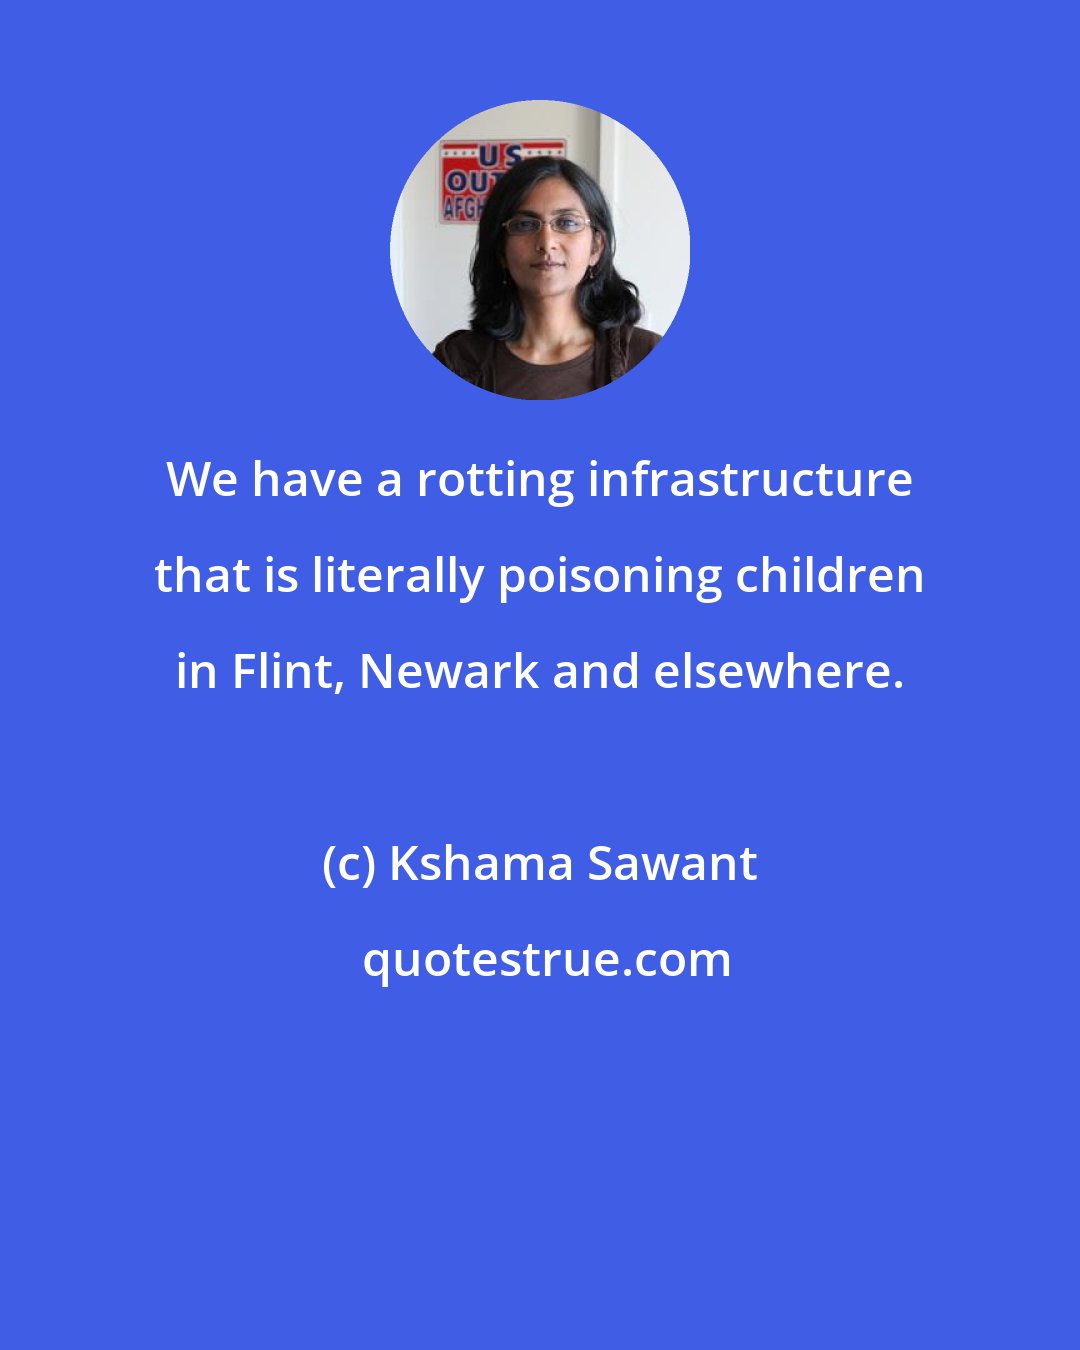 Kshama Sawant: We have a rotting infrastructure that is literally poisoning children in Flint, Newark and elsewhere.